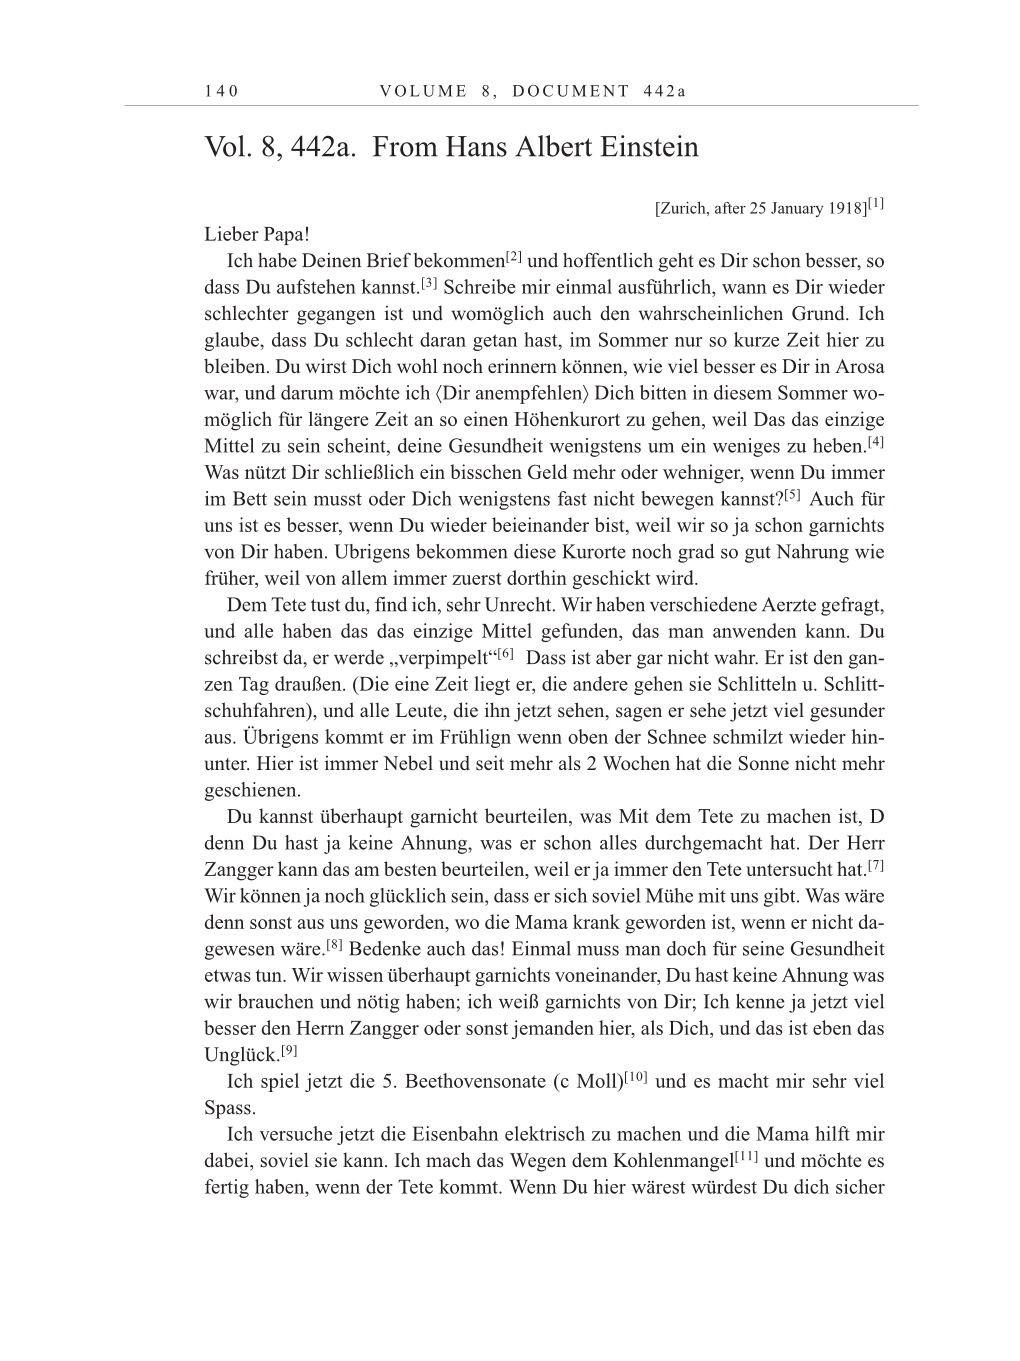 Volume 10: The Berlin Years: Correspondence May-December 1920 / Supplementary Correspondence 1909-1920 page 140